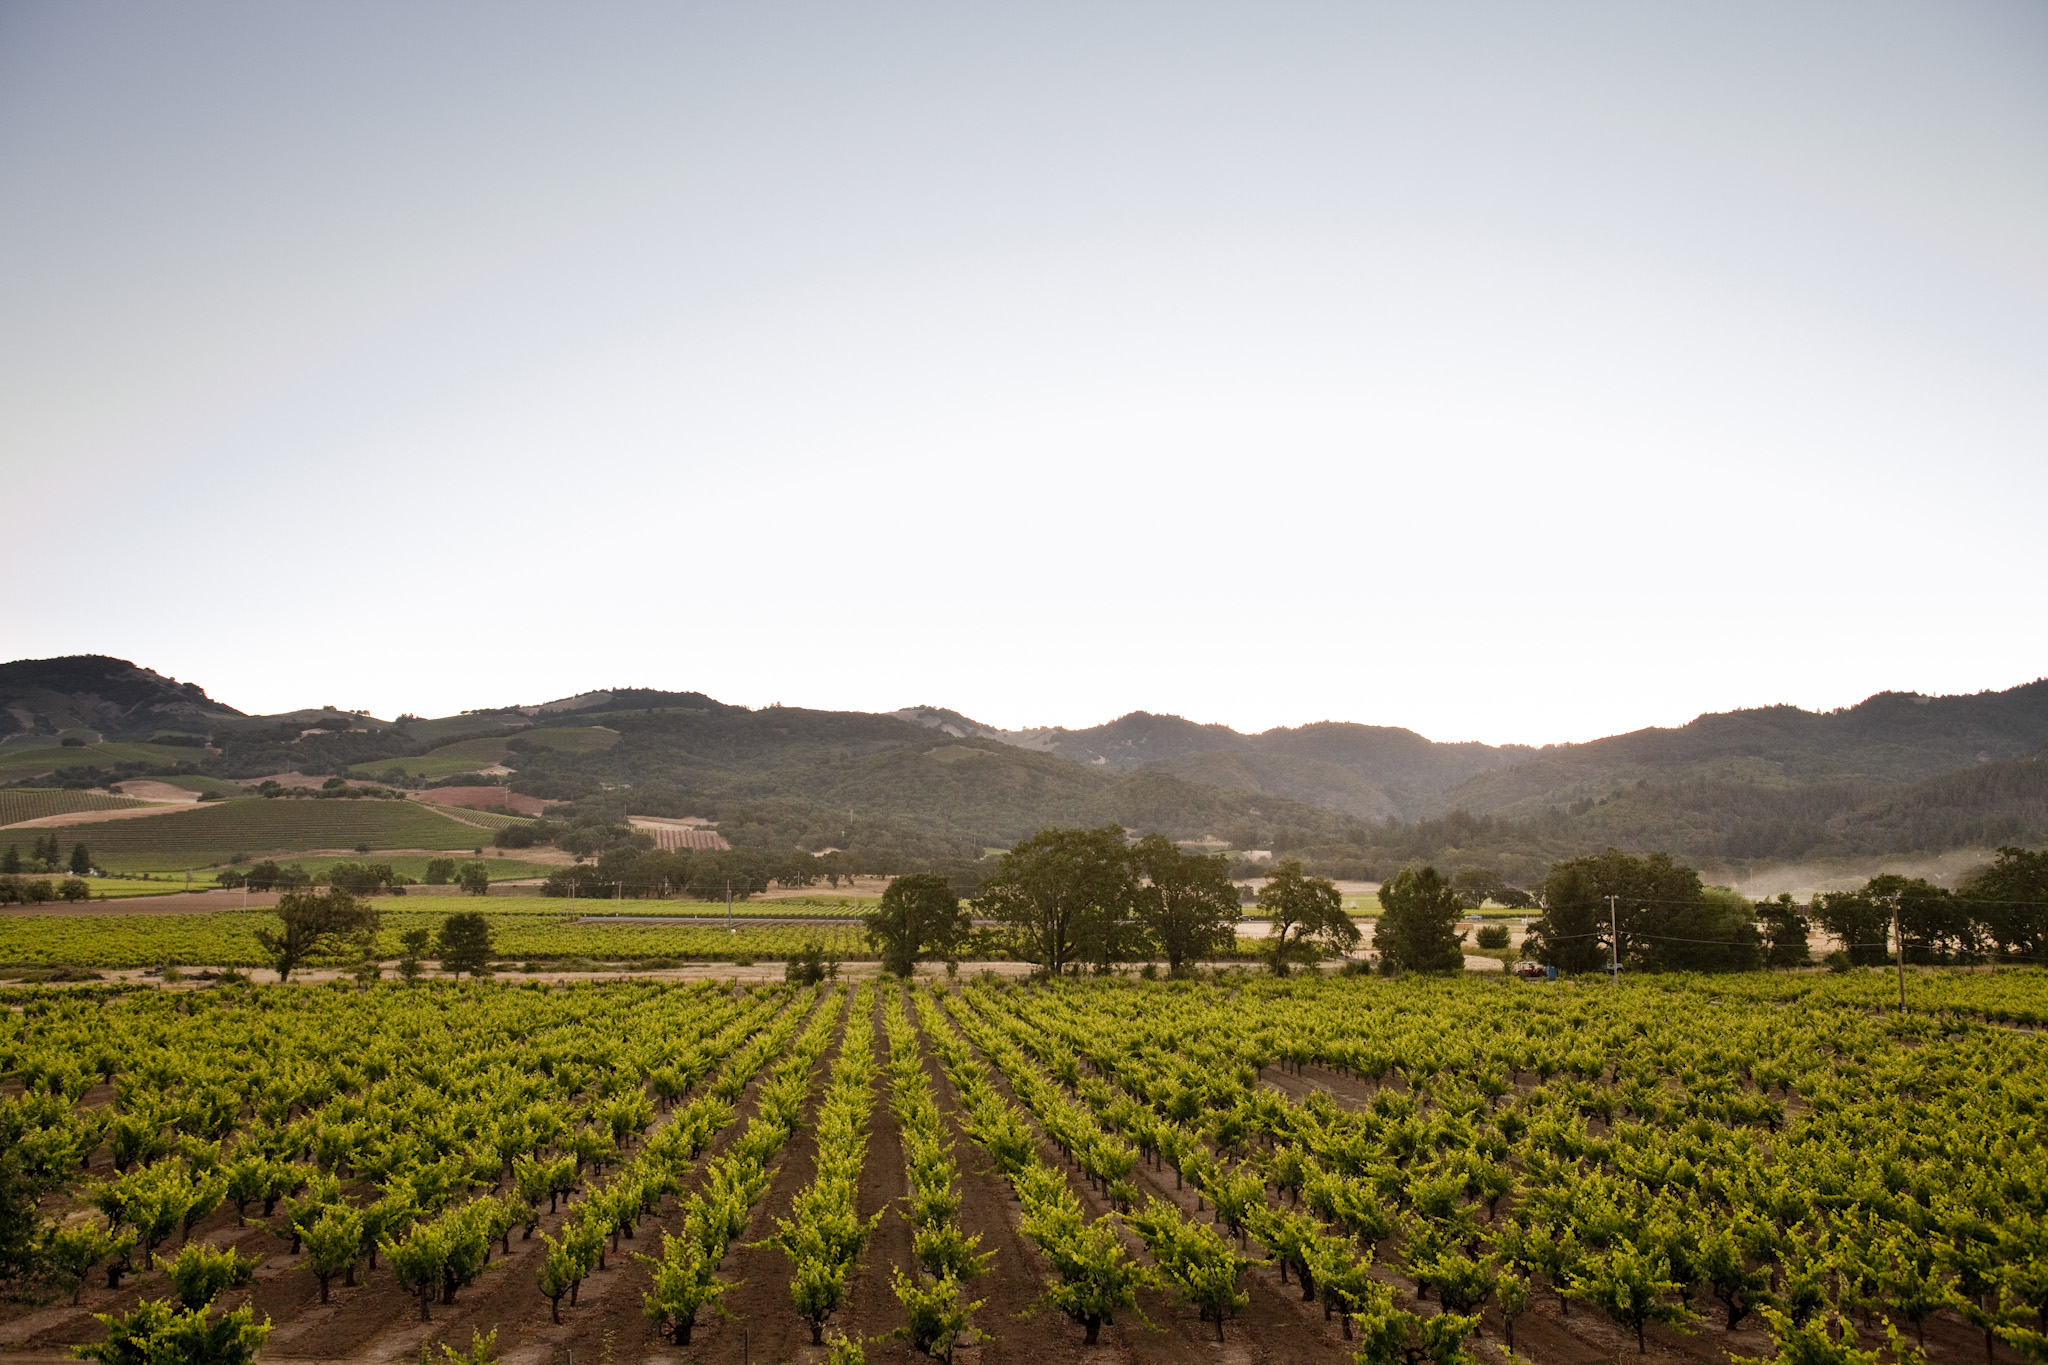 Pagani Ranch vineyard view, with head-trained vines stretching out to oak trees and hills